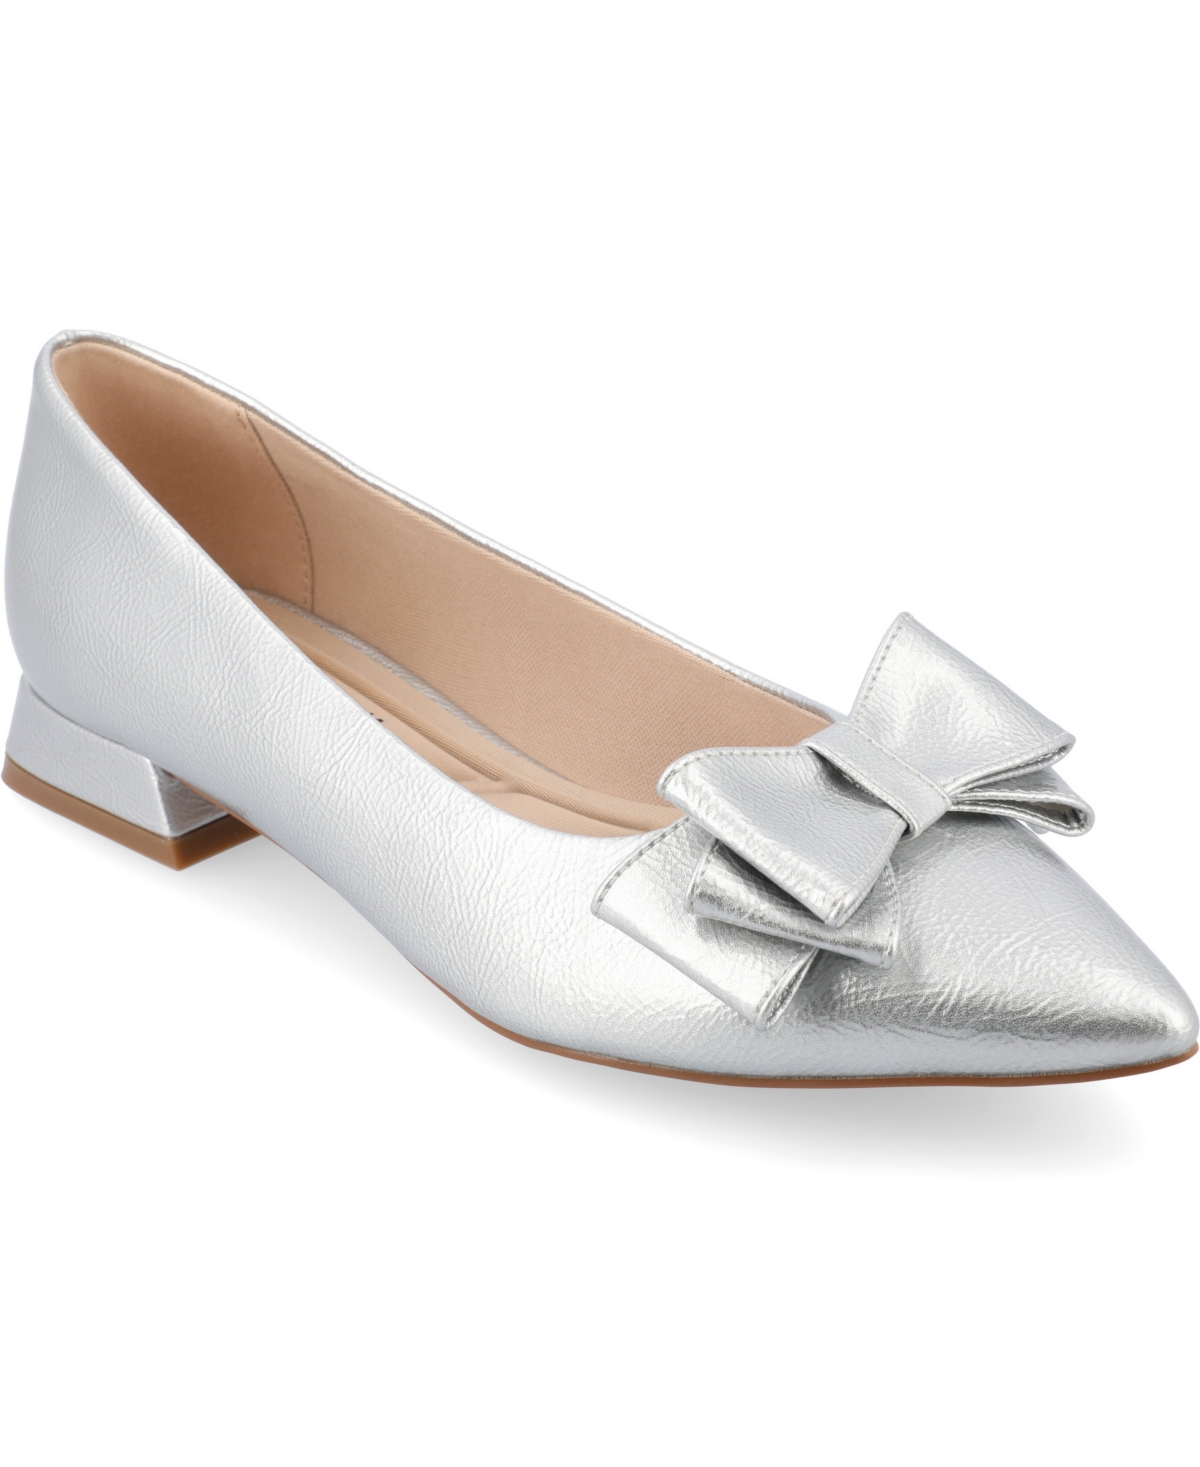 Women's Ophelia Slip On Pointed Toe Flats - Silver